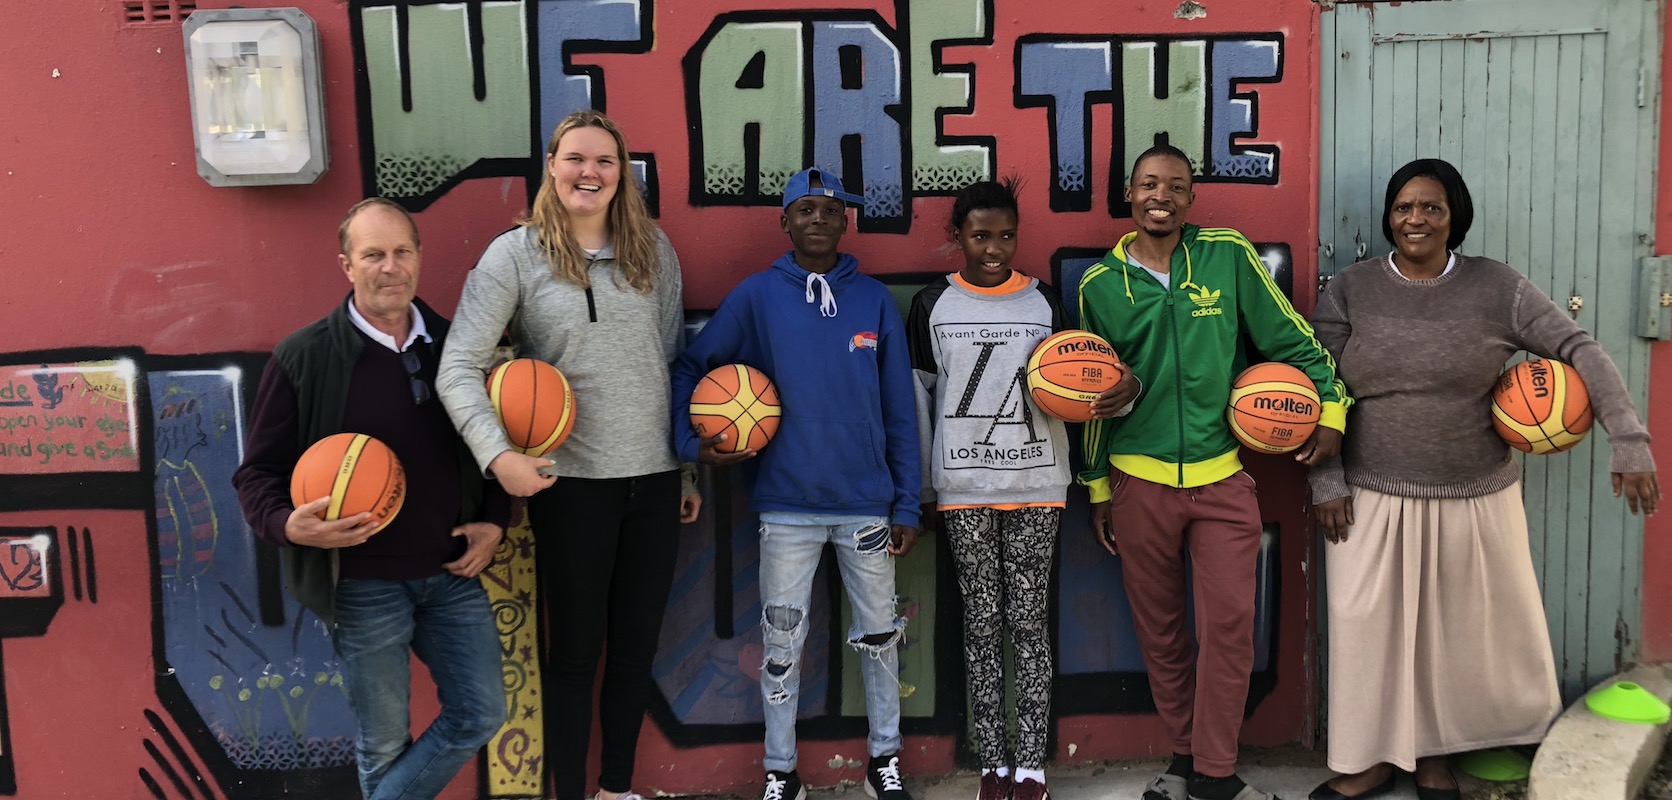 Student with basketball players in South Africa